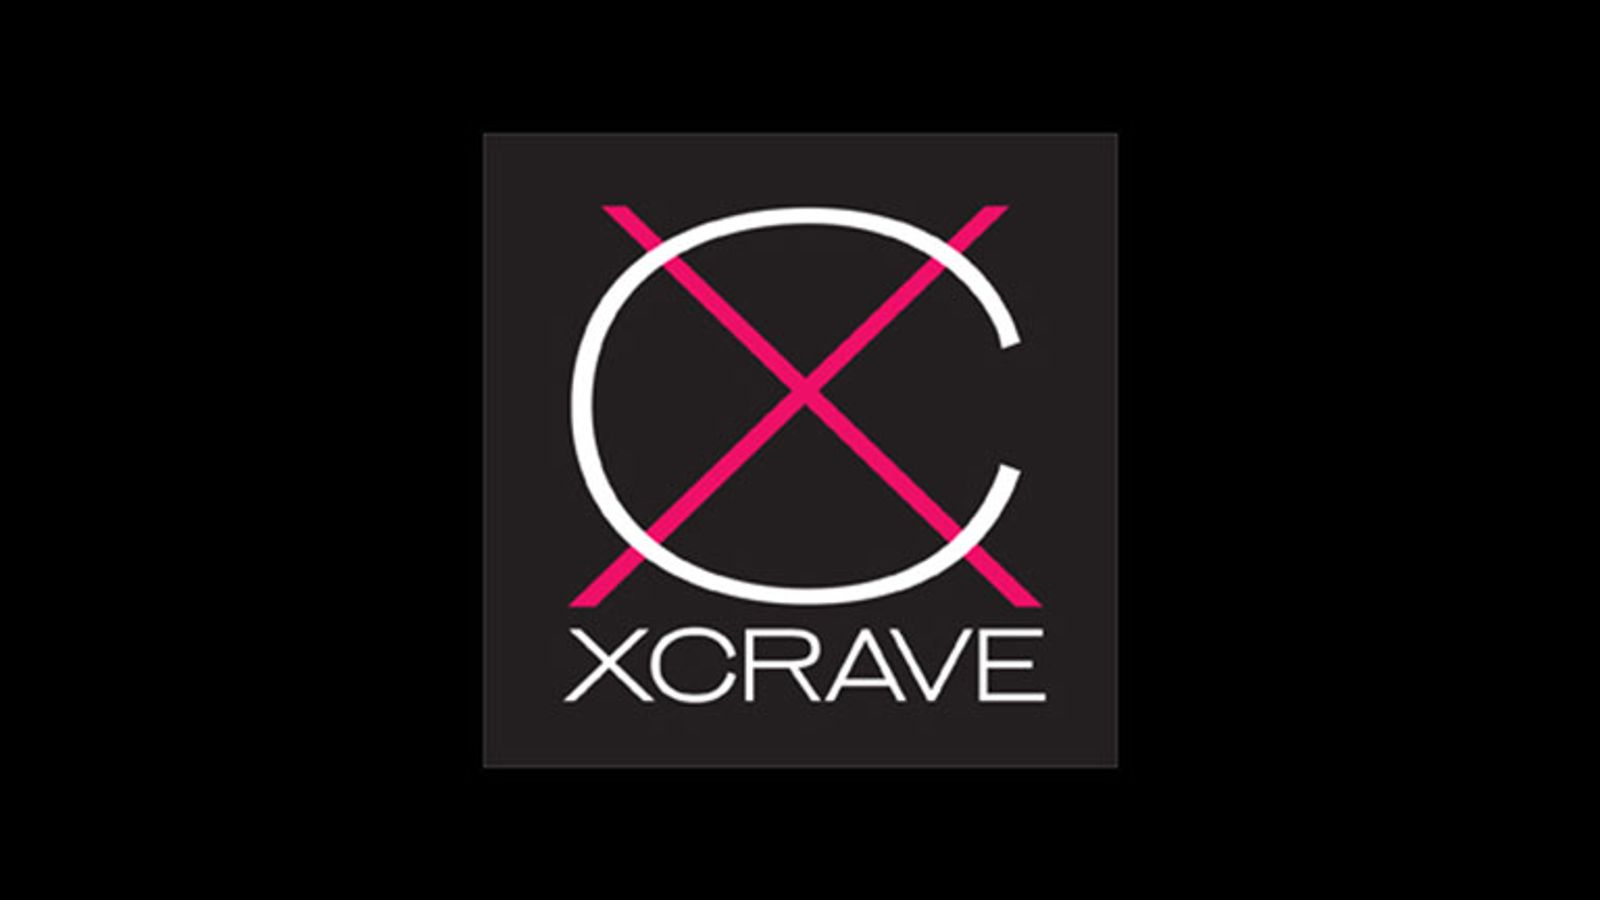 XCrave.com Announces Site Revamp, Adds Tribute Offering